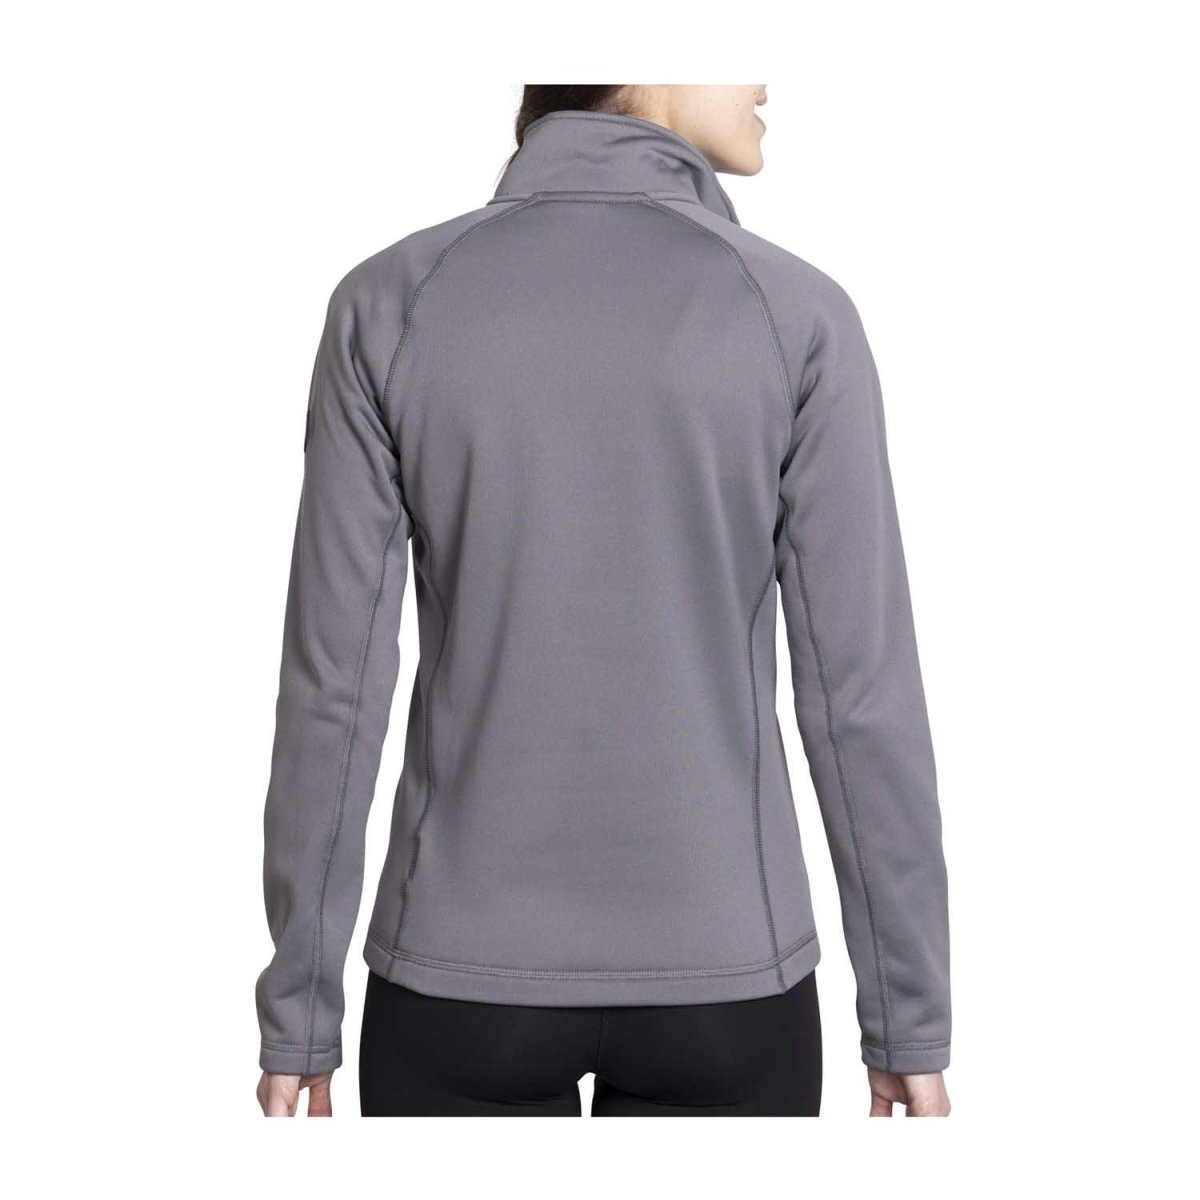 Outdoors with Pokémon Middle Fork Gray Quarter-Zip Fleece Pullover ...